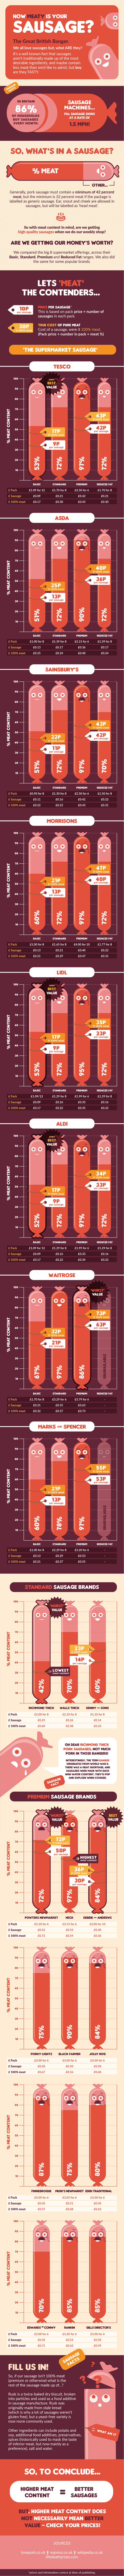 Infographic | How Meaty is Your Sausage?